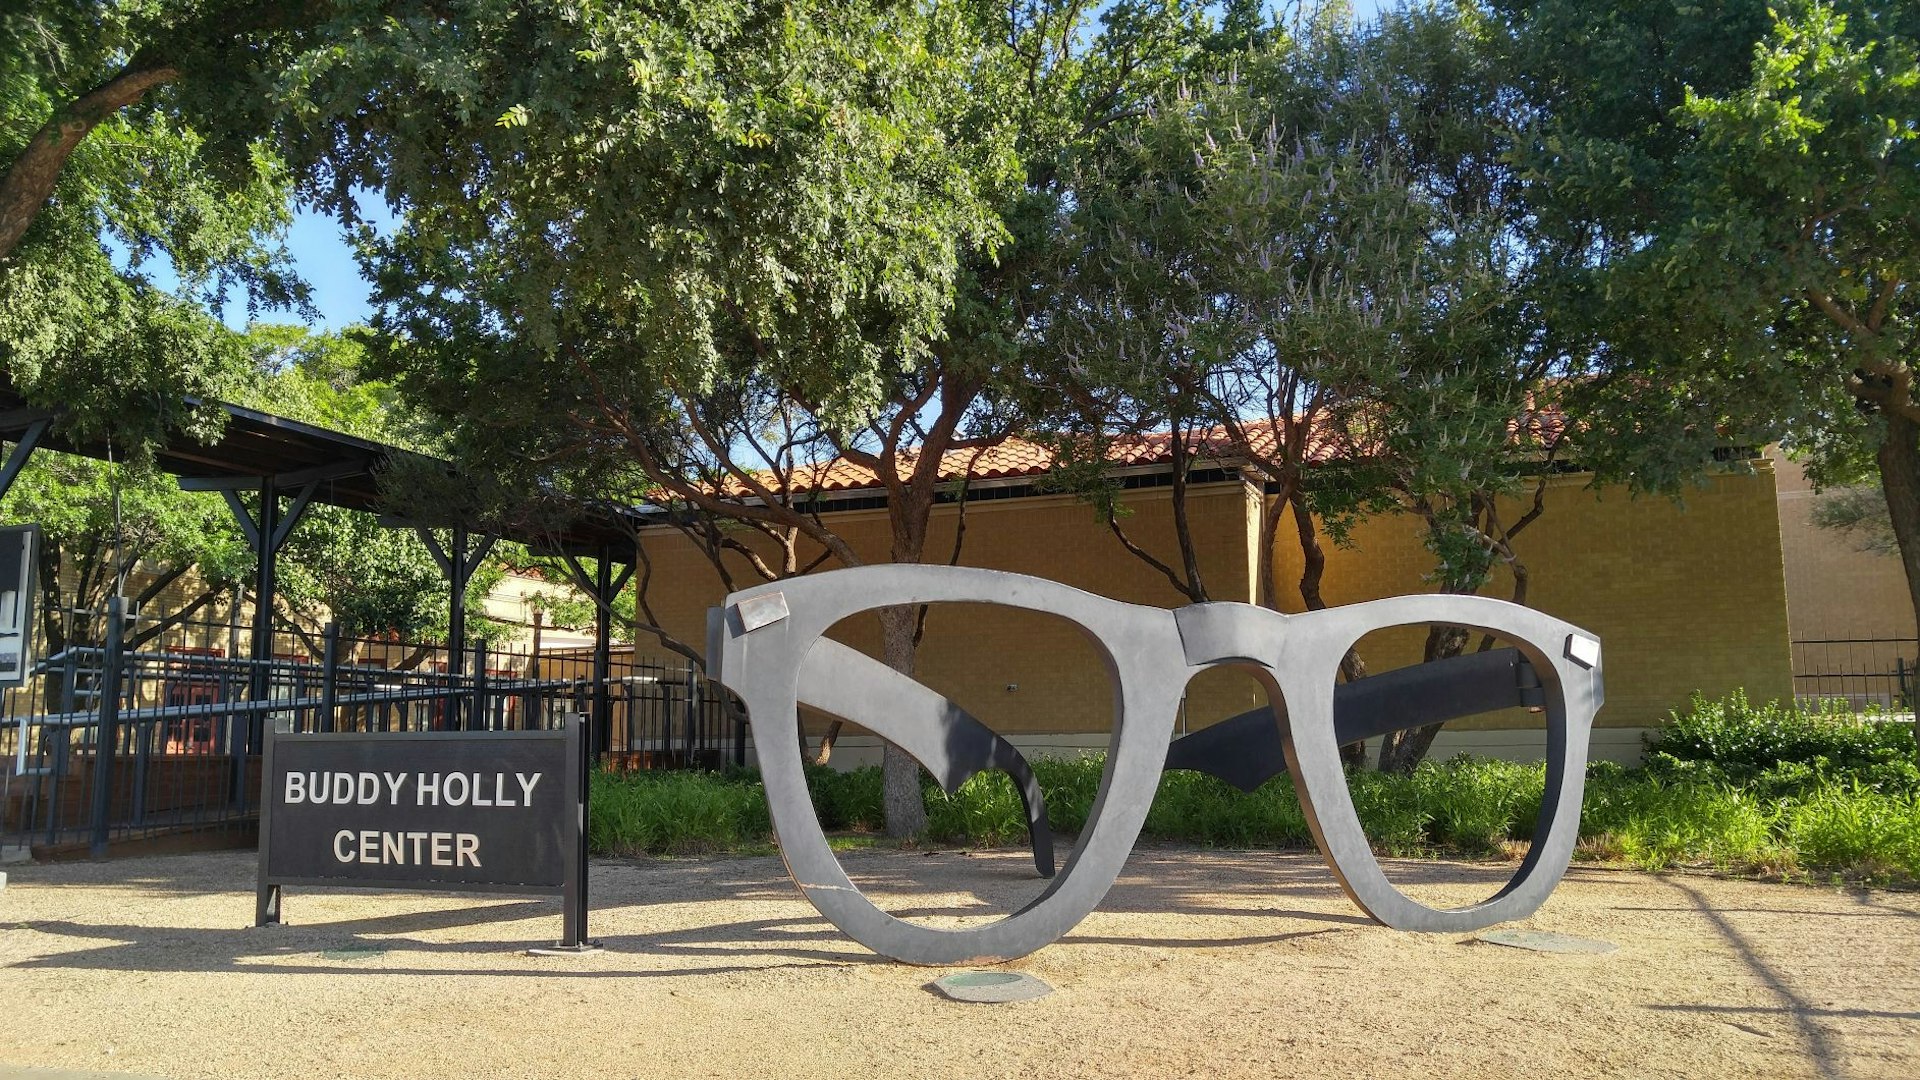 A large pair of Buddy Holly's signature sunglasses sit outside the Buddy Holly Center. USA museums for music lovers